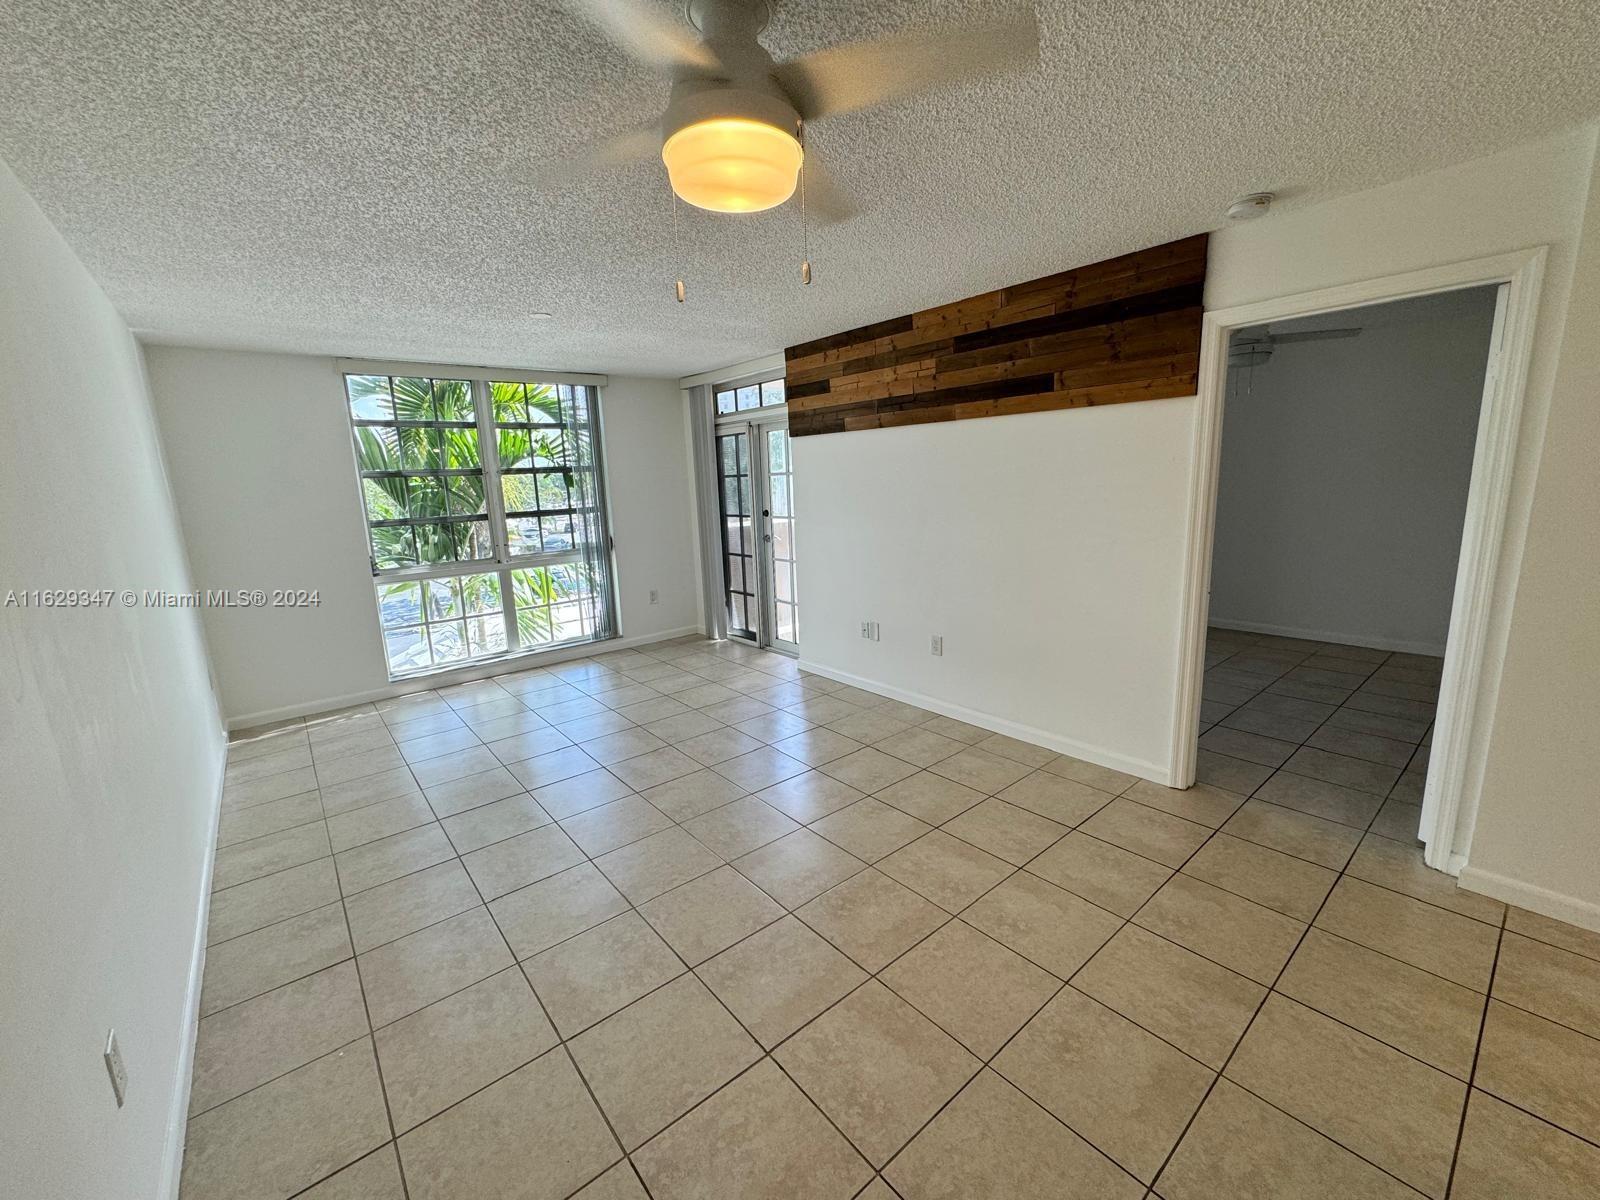 EXCELLENT UNIT IN A RELAXING AND CONFORTABLE CONDO, IN THE BEST AREA IN CORAL GABLES.CLOSE THE UM, MALLS AND ENTERTAIMENT AND MORE. THE UNIT IS REMODELED WITH STAINLESS STELL APPLIANCES, GRANITE TOPS, COUNTER TOPS AND BACK SPLASH, LED LIGTHS, WASHER AND DRYER COMBO, VERY ILUMINATED, WITH VERY GOOD ORIENTATION. THE CONDO HAS MANY AMENITIES, SWIMMING POOL, JACUZZI, LAUNDRY, GYM AND MORE. READY TO MOVE.  Equal Housing Opportunity.